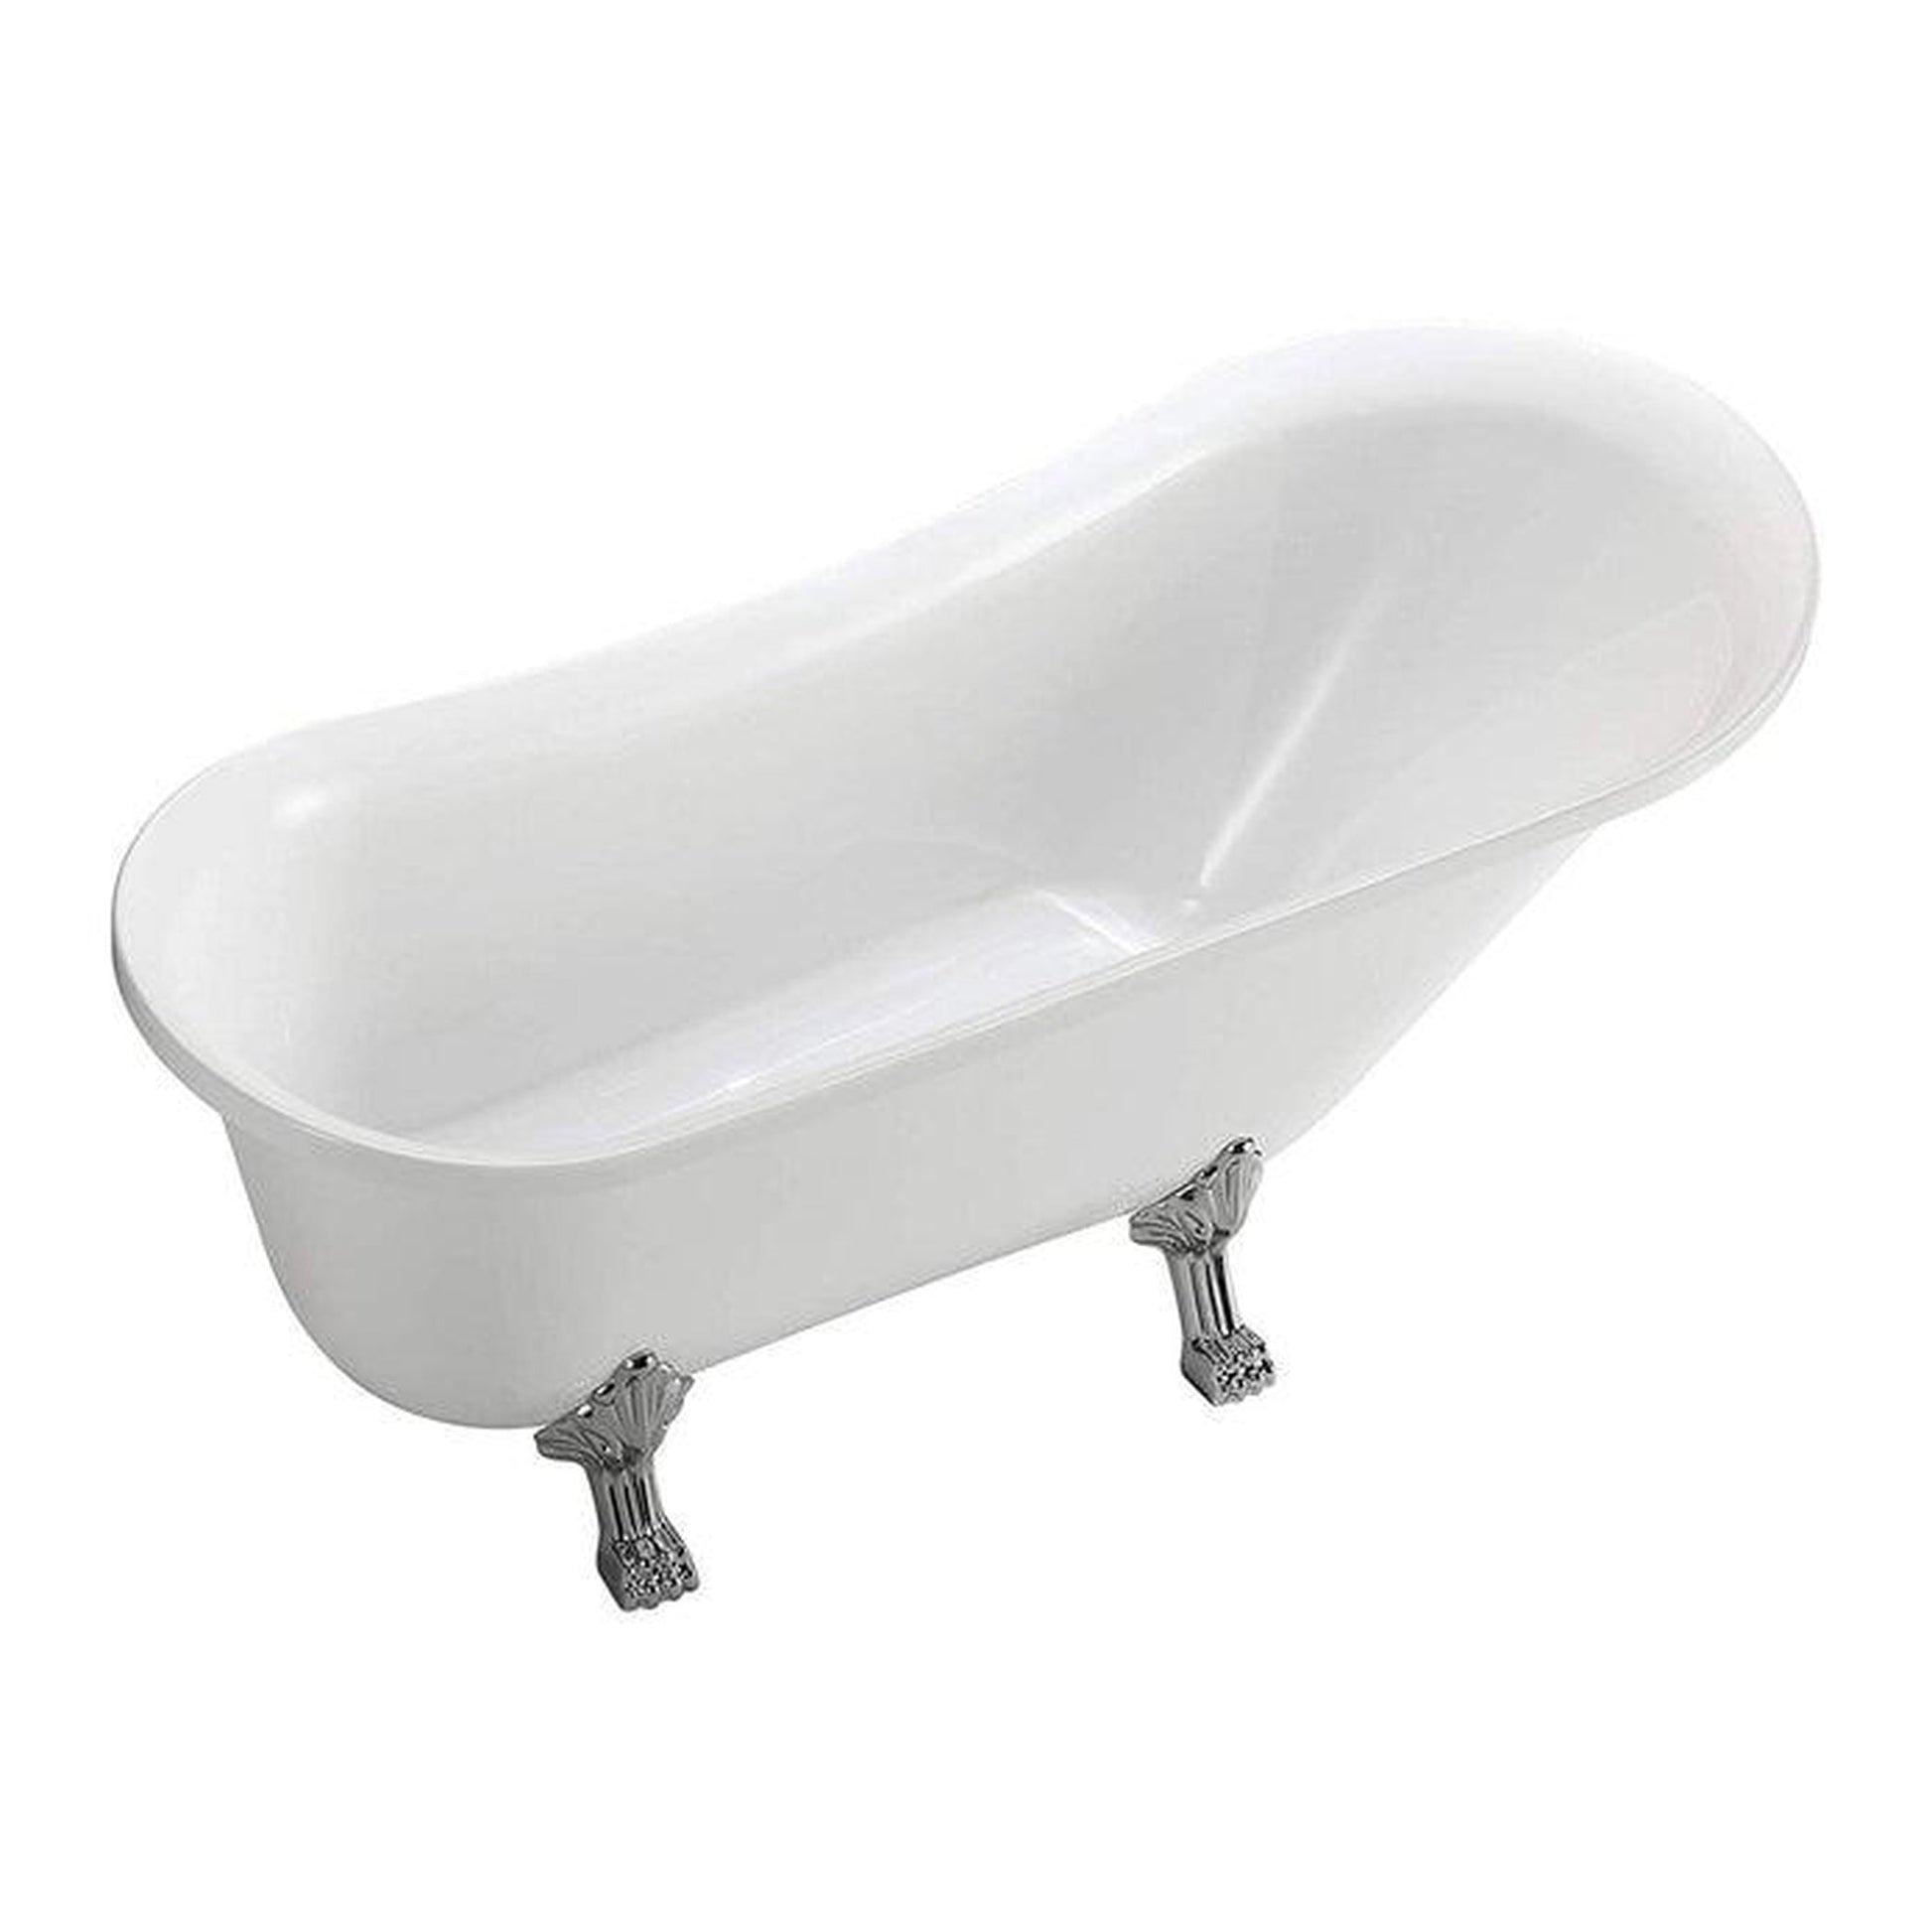 Vanity Art 69" W x 30" H White Acrylic Freestanding Claw Foot Bathtub With Polished Chrome Pop-up Drain and Flexible Drain Hose